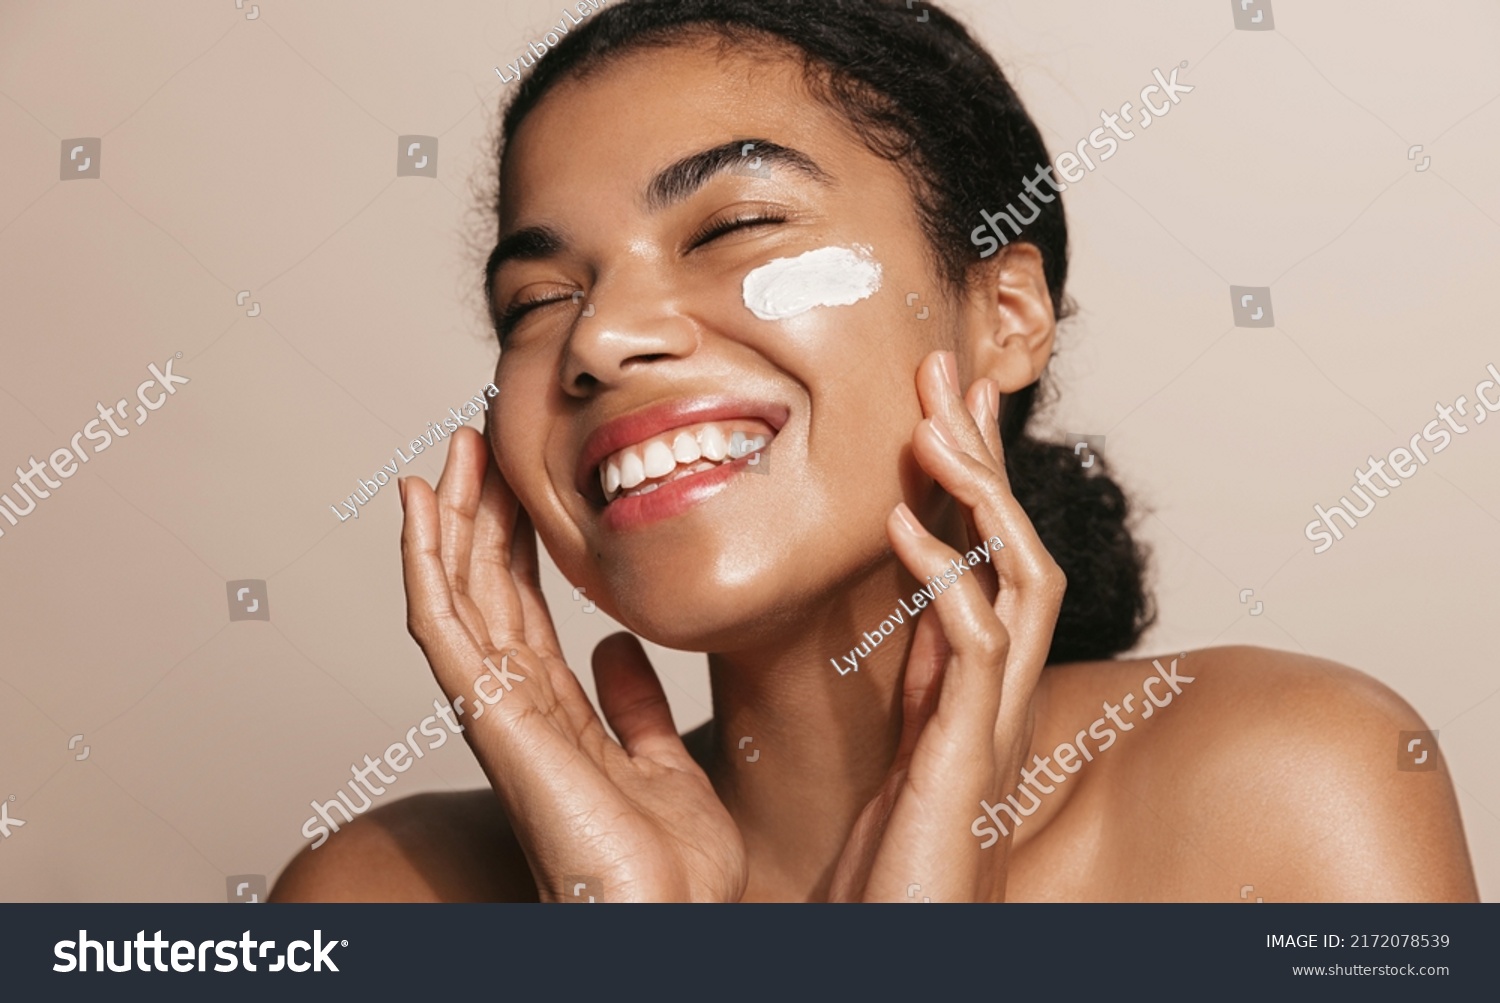 Smiling woman using skincare product. Female taking face cream to apply on facial skin #2172078539